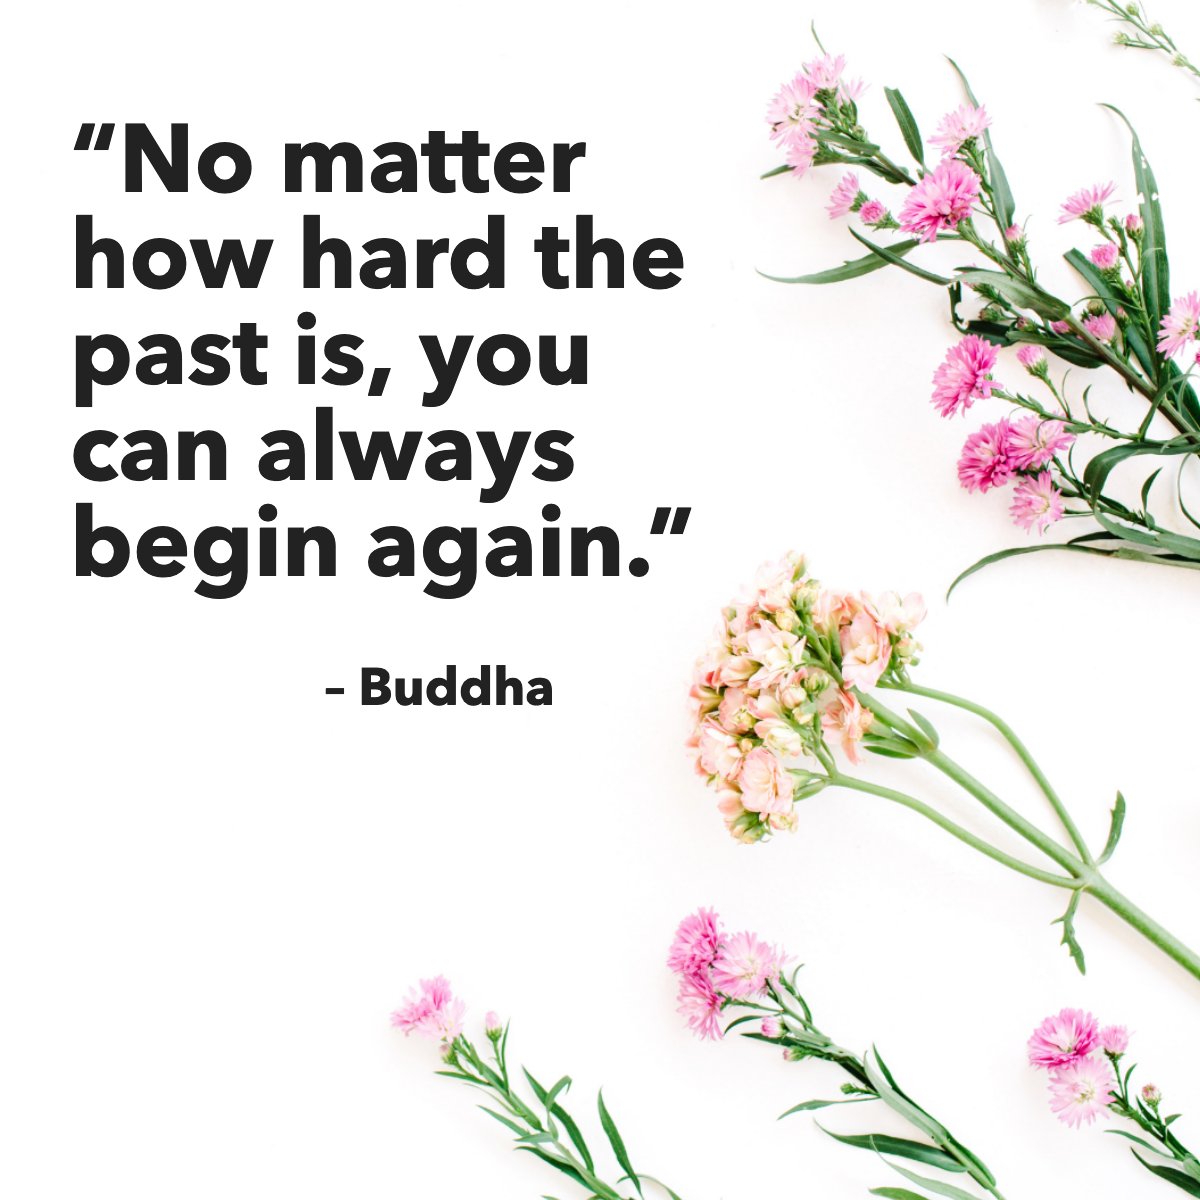 'No matter how hard the past is, you can always begin again.' 🙏 
– Buddha

What are you beginning this week? Drop us a line in the comments.

#flowers     #florals     #quote     #newbeginnings     #buddha
#RemaxHustle #ColoradoSpringsHomes #SheSellsSanctuary